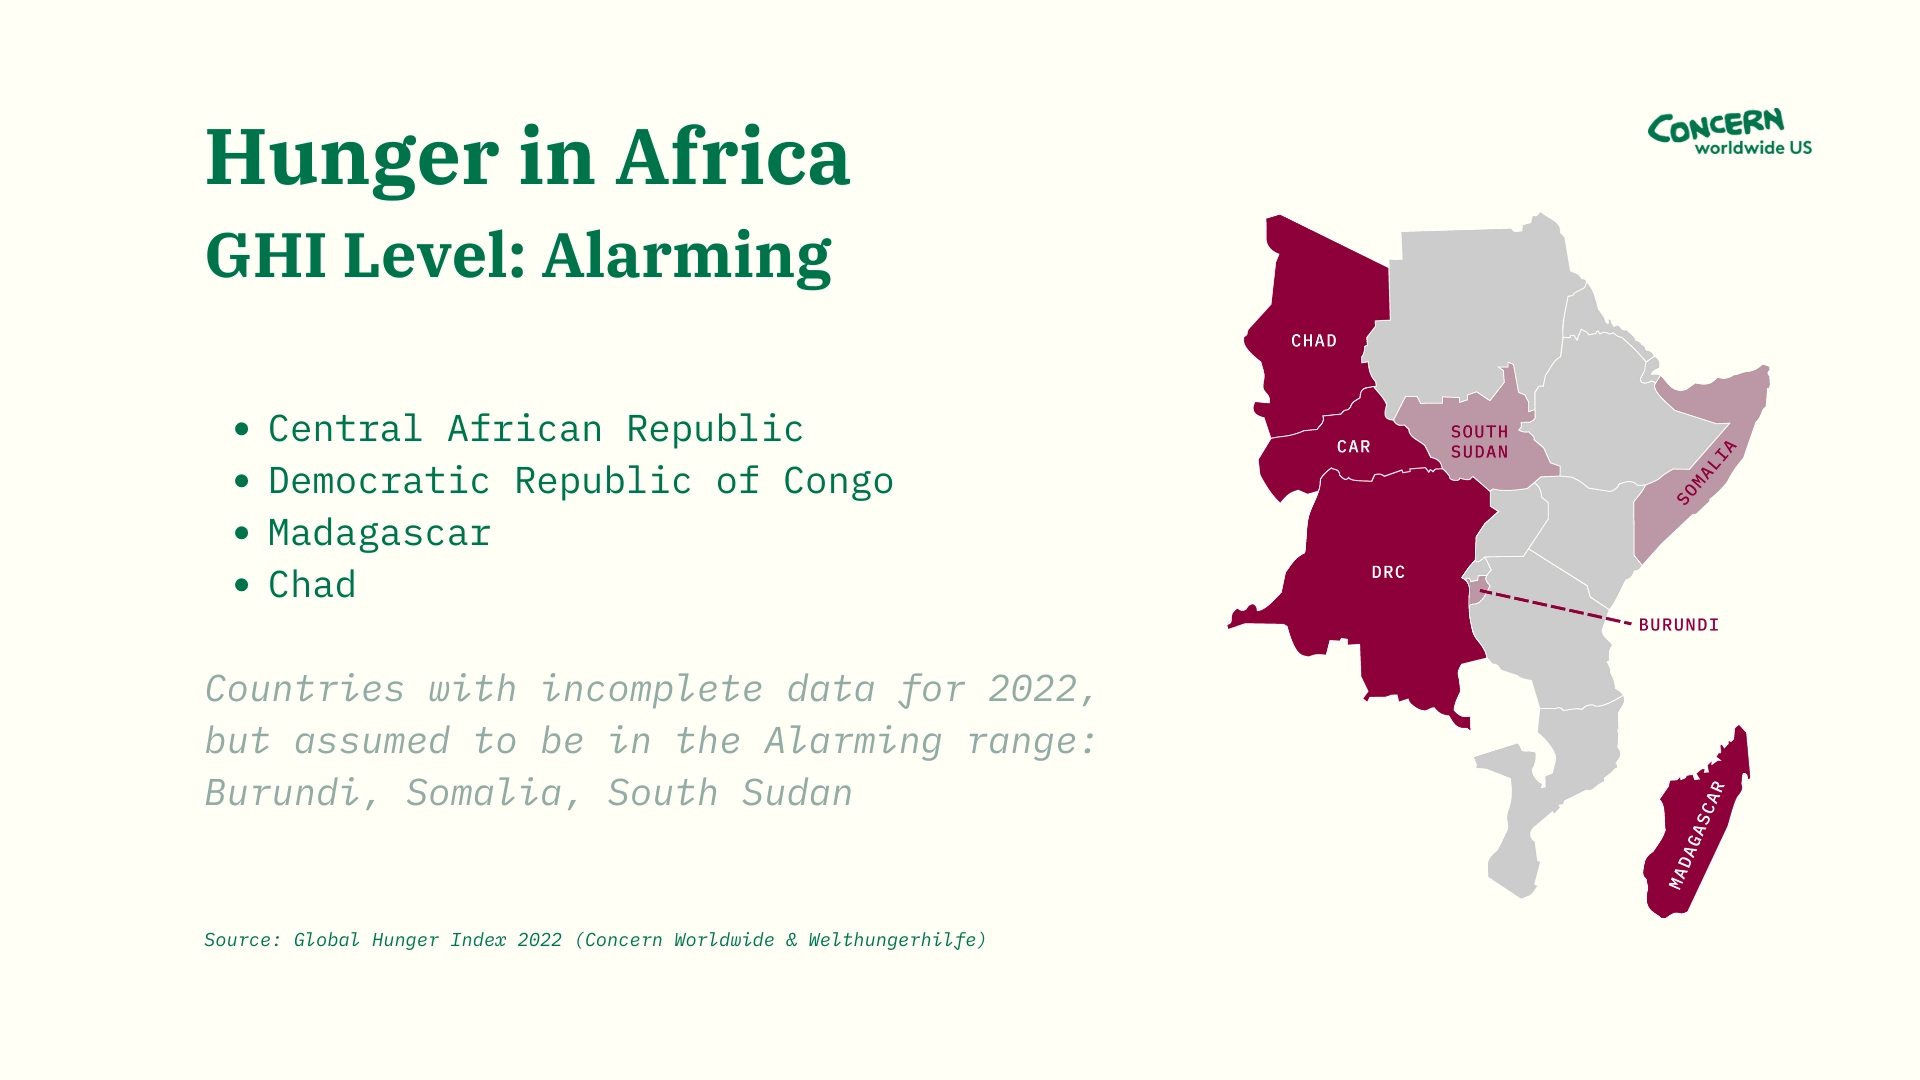 An infographic illustrating hunger levls in the Horn of Africa.